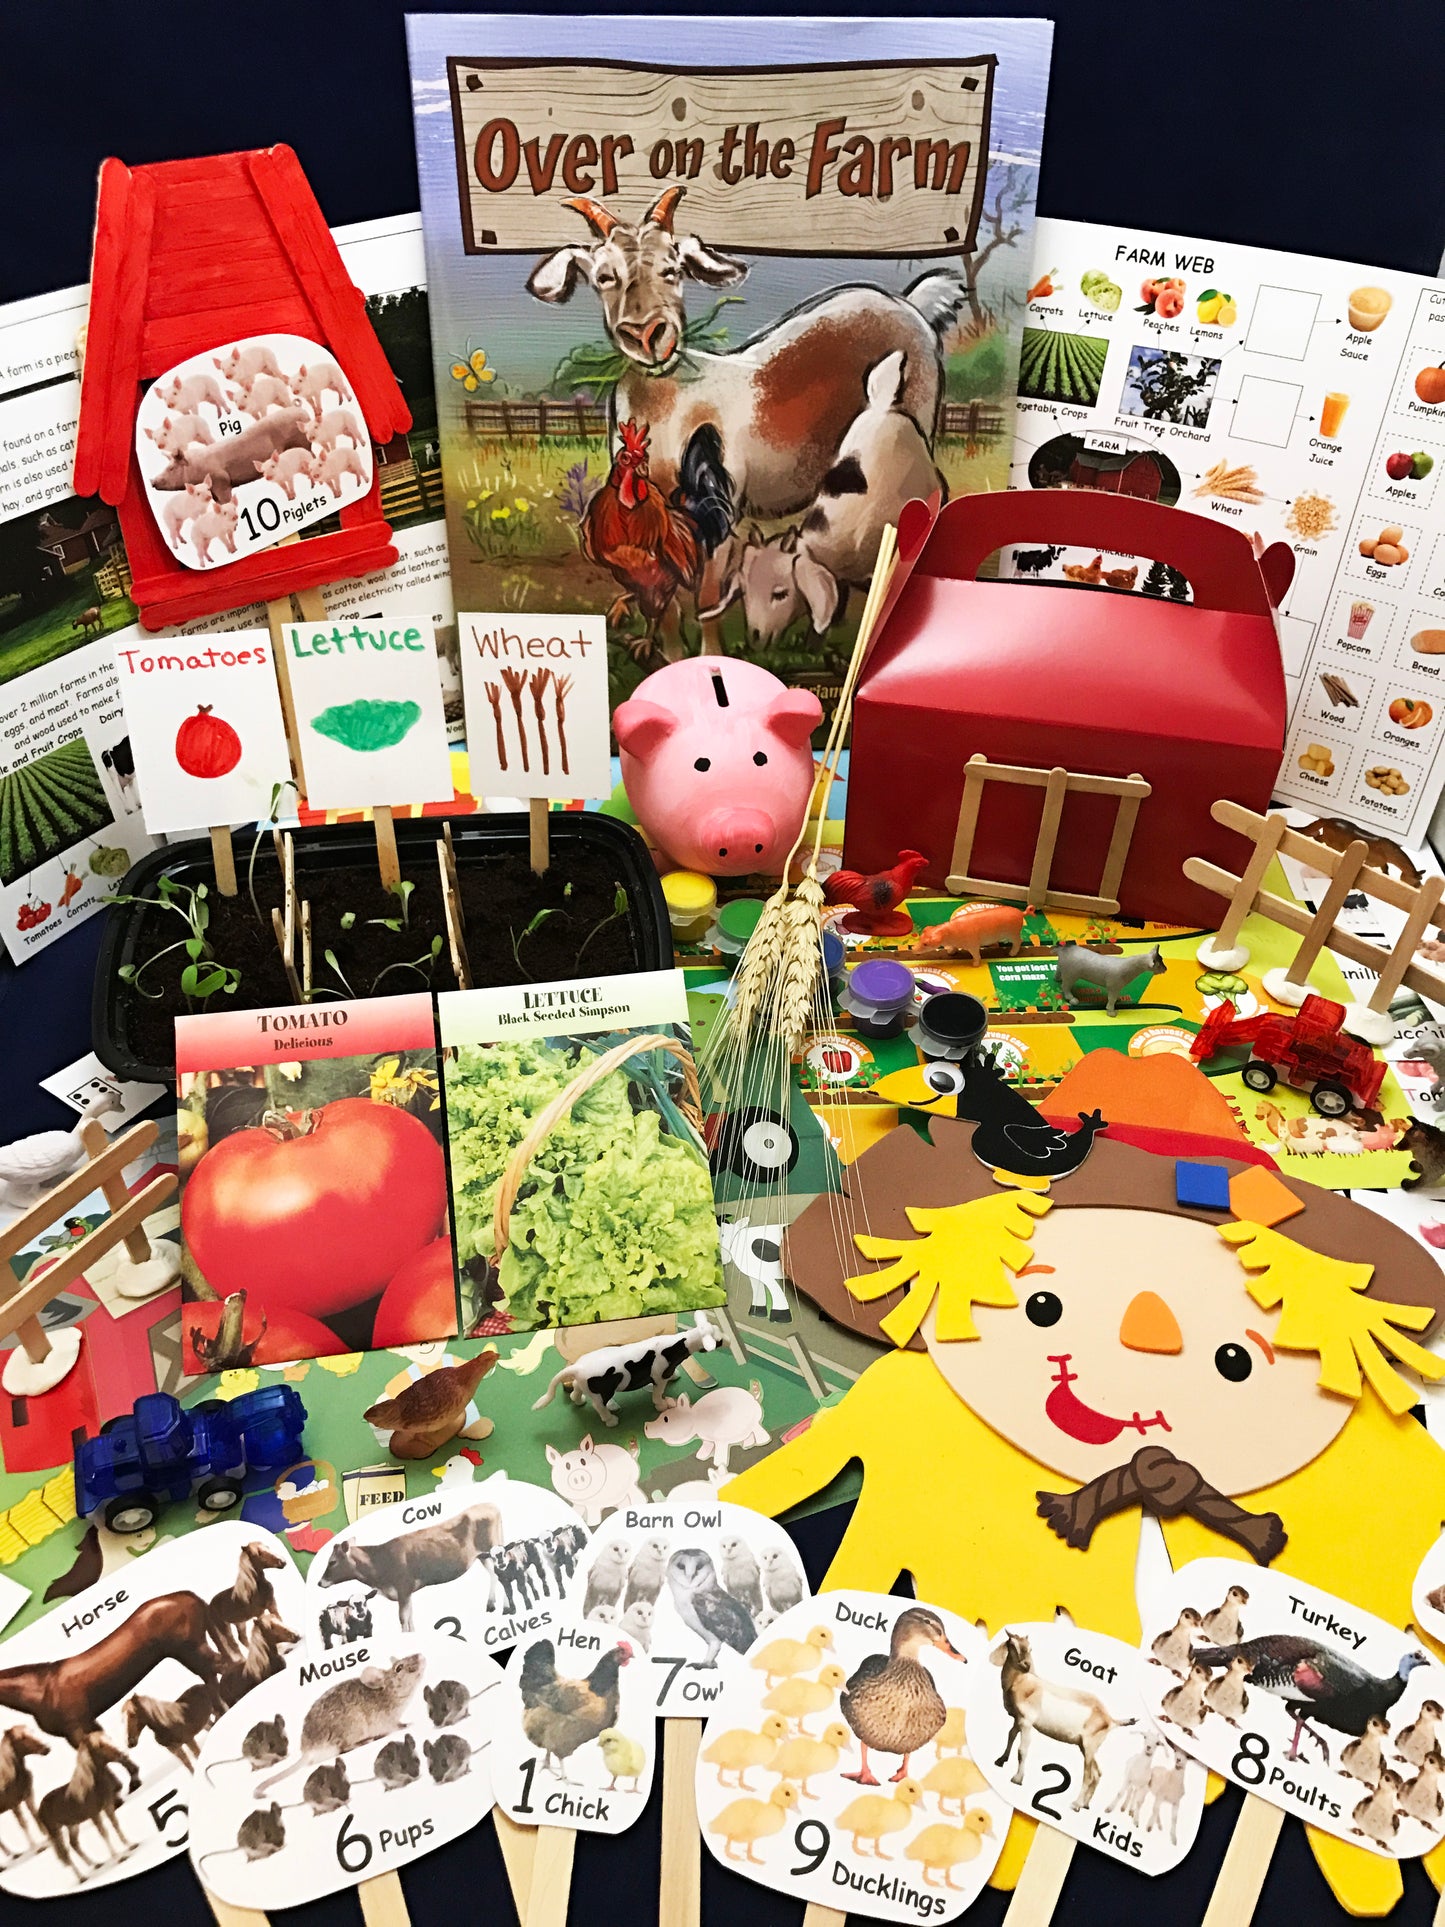 STEAM activities inspired by the children's book Over on the Farm